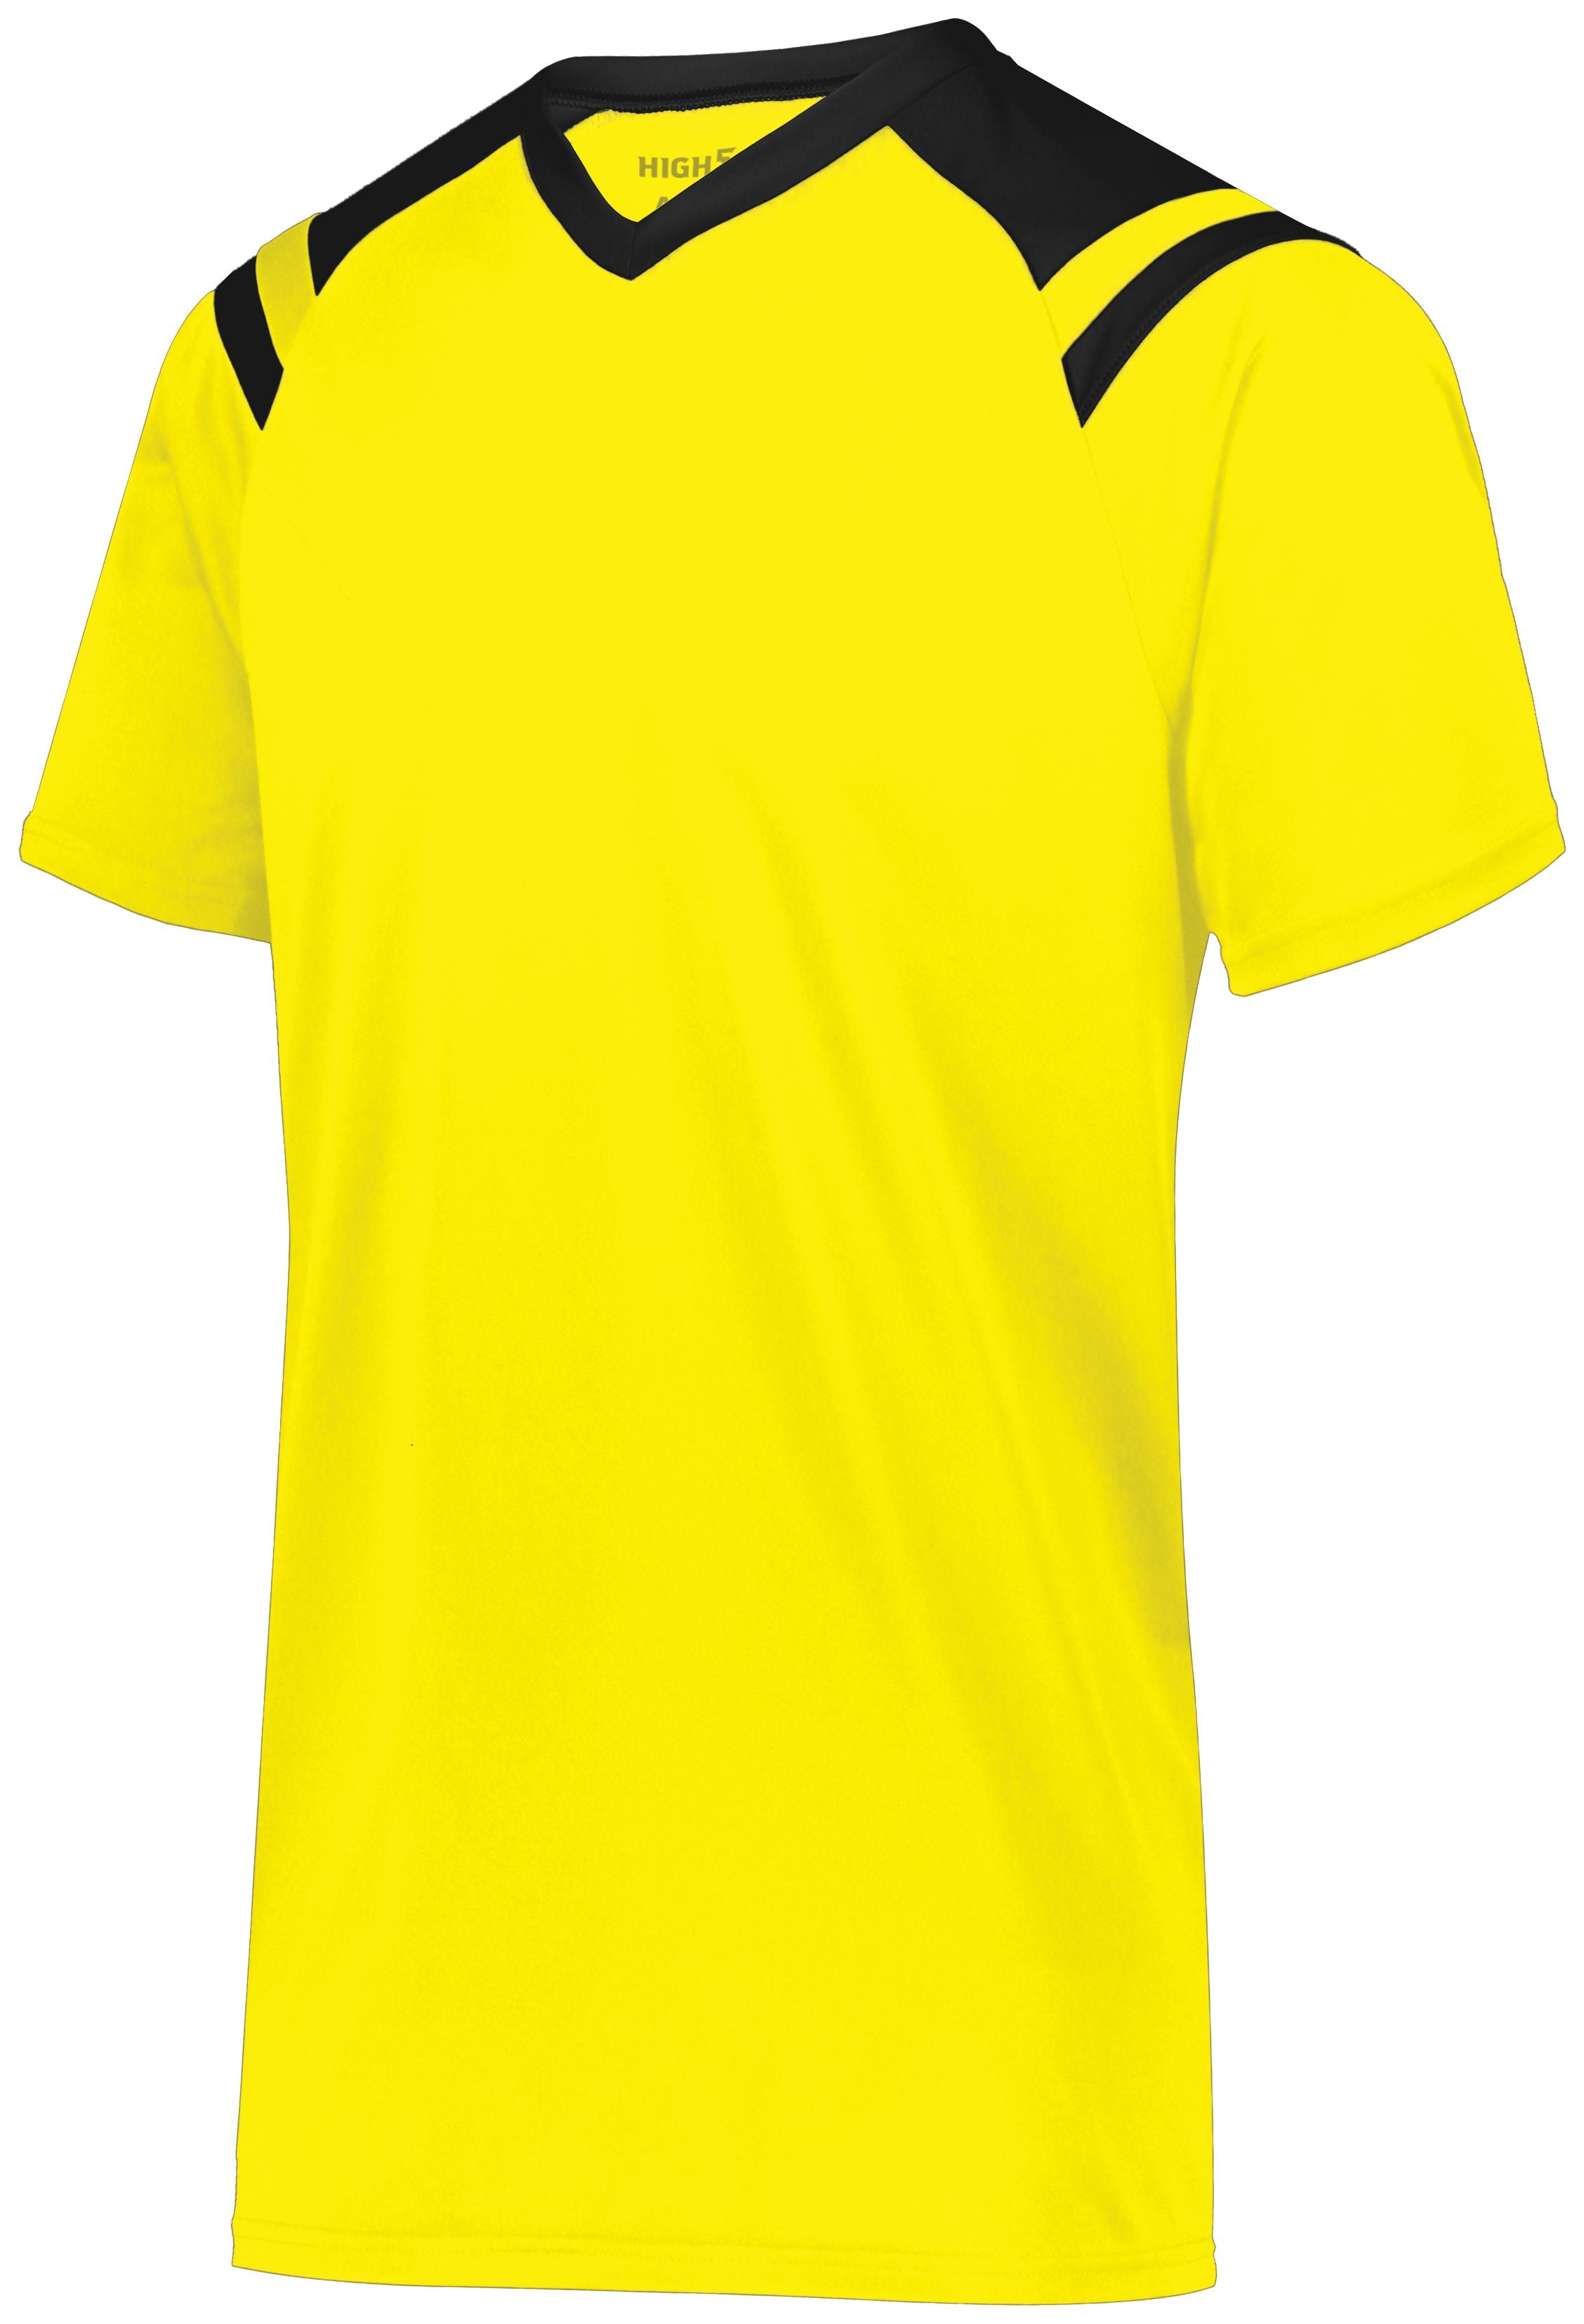 High 5 Youth Sheffield Jersey in Electric Yellow/Black  -Part of the Youth, Youth-Jersey, High5-Products, Soccer, Shirts, All-Sports-1, Sheffield-Soccer-Jerseys product lines at KanaleyCreations.com